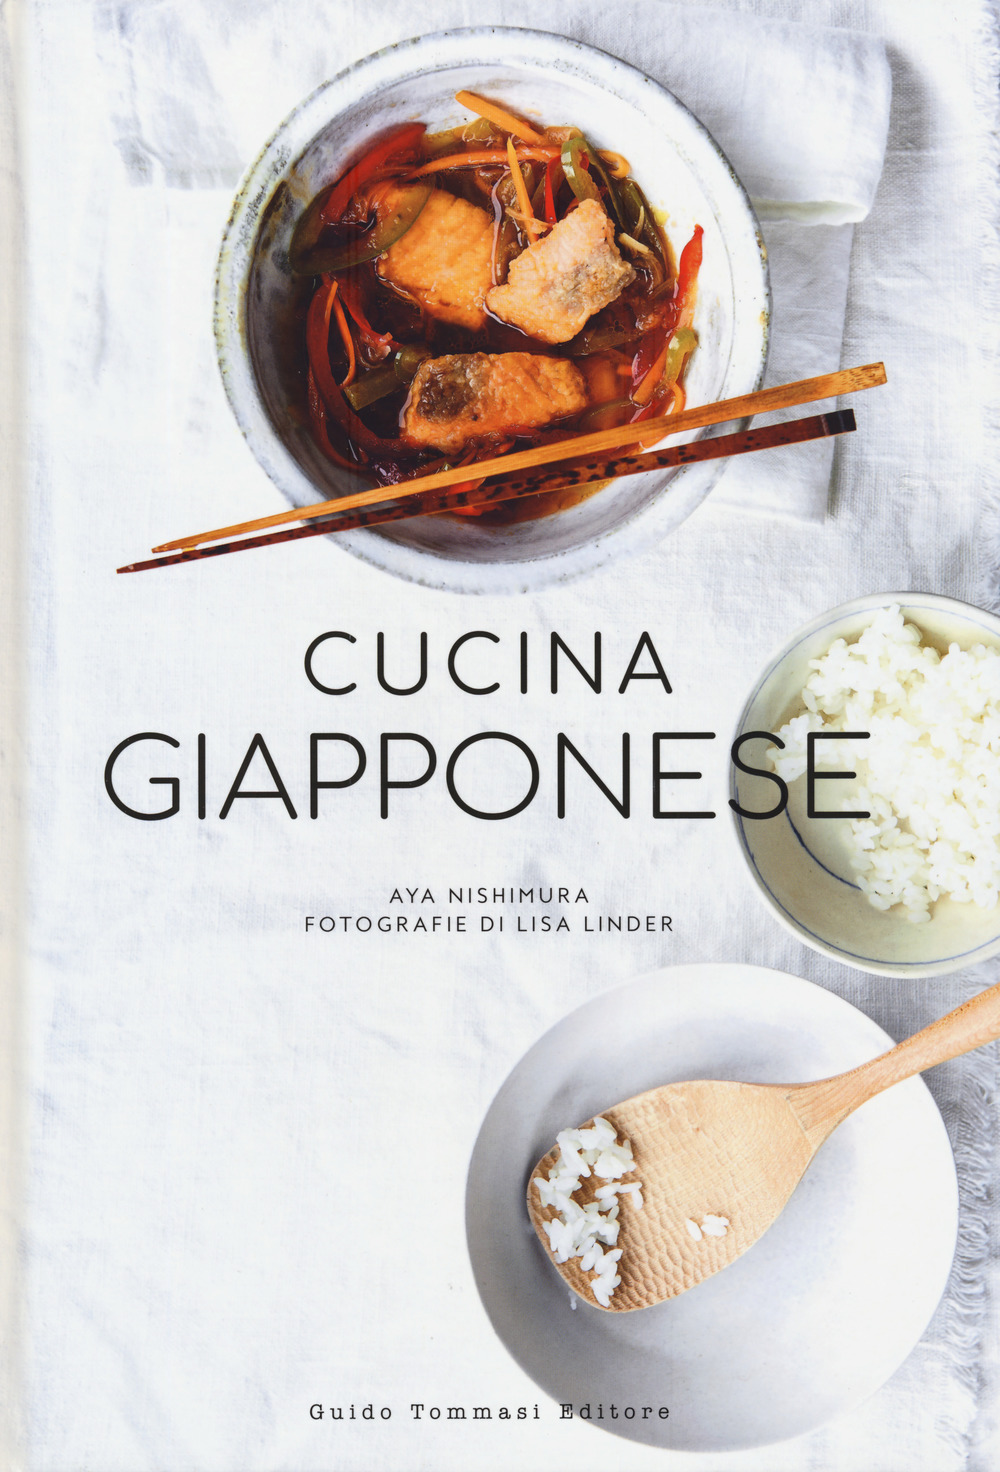 Image of Cucina giapponese